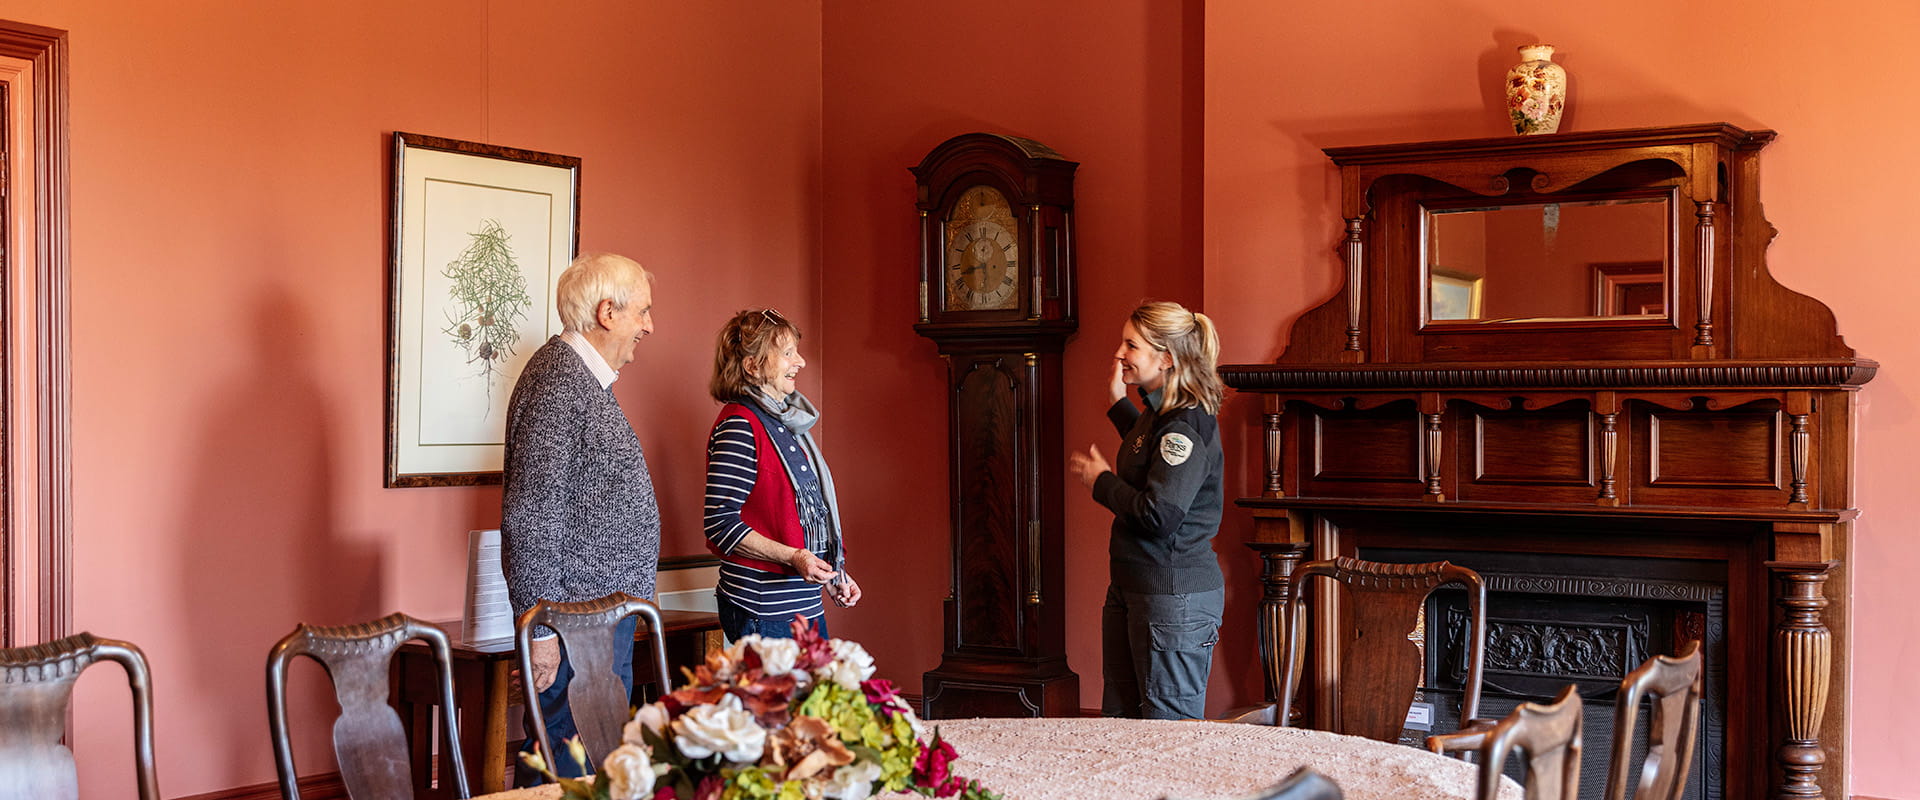 A park ranger points to an old grandfather clock while giving a tour to a man and woman in the dining room of a heritage building with high ceilings and salmon-coloured walls.